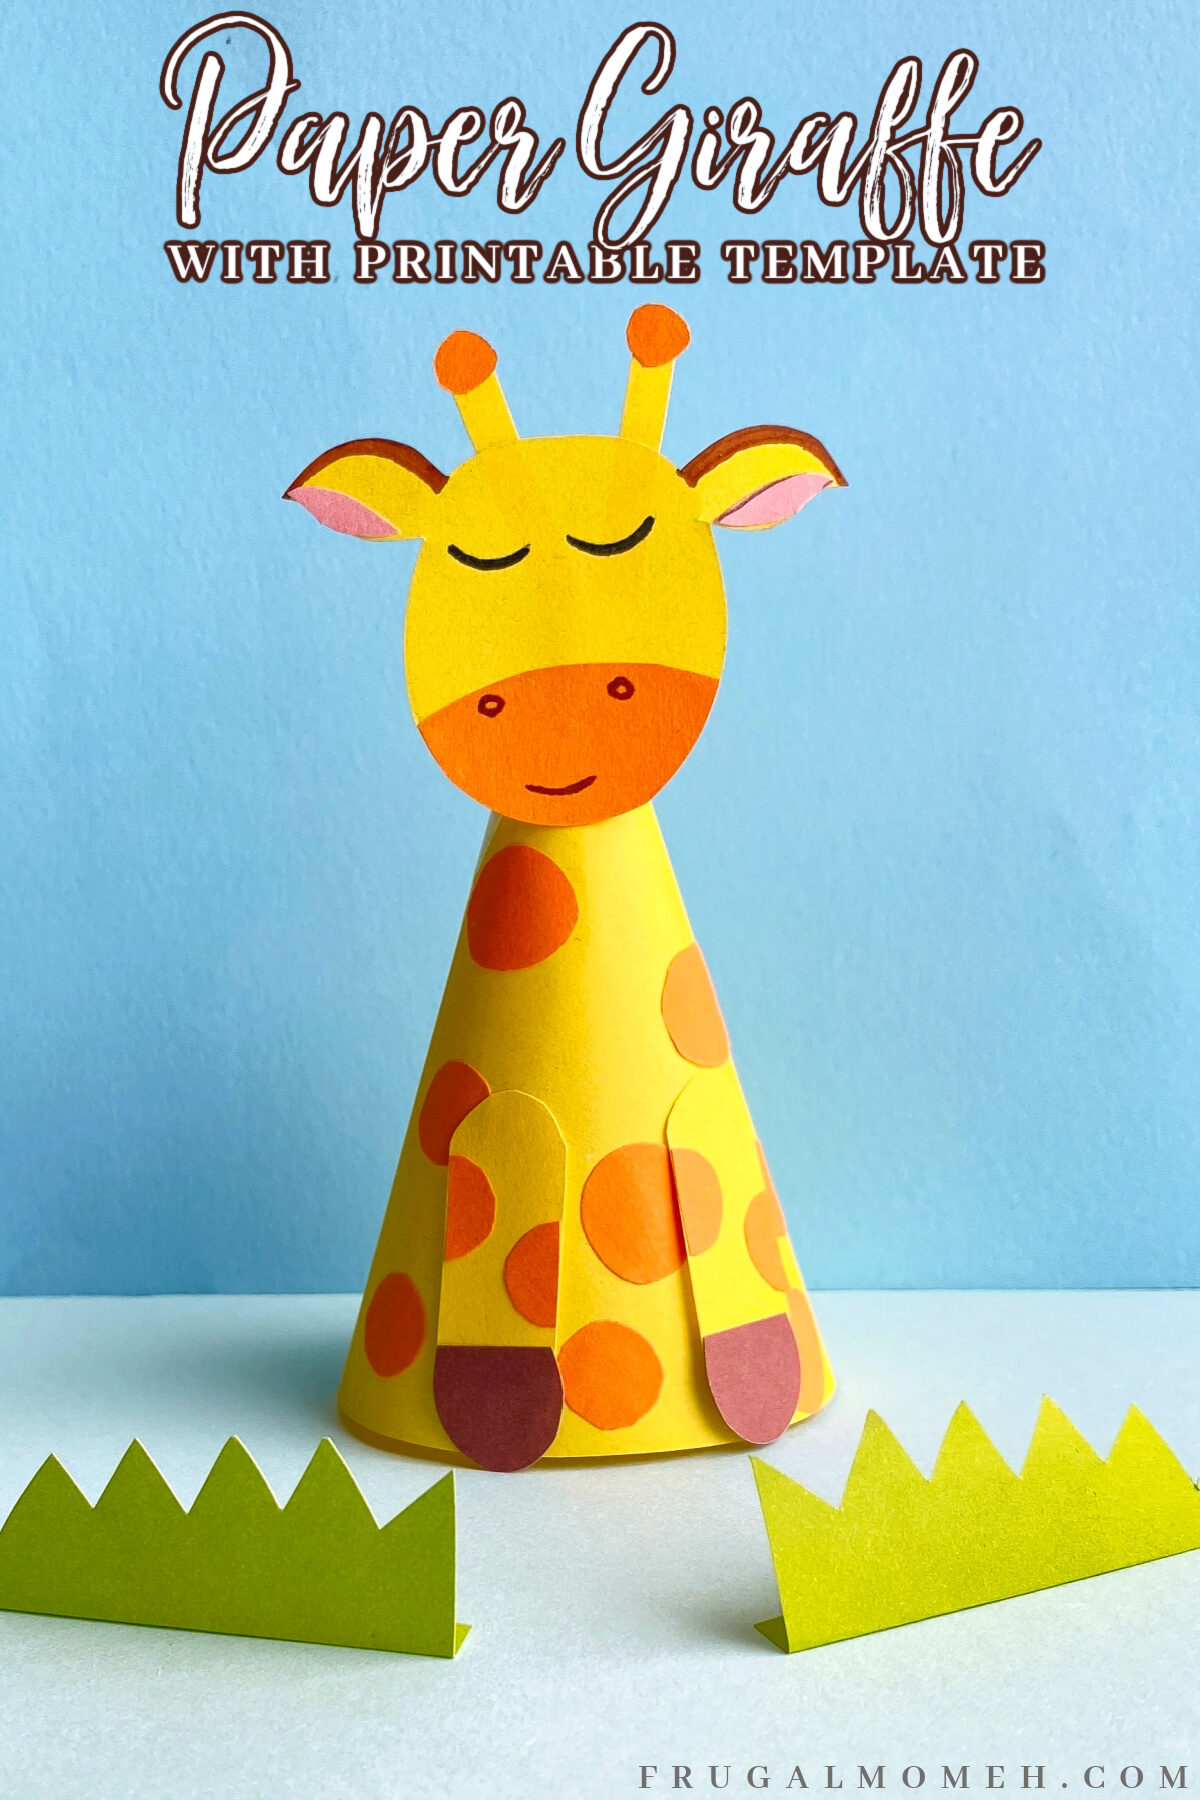 This fun paper giraffe craft for kids includes a free printable template that makes it easy to create a cone-shaped giraffe that stands tall!